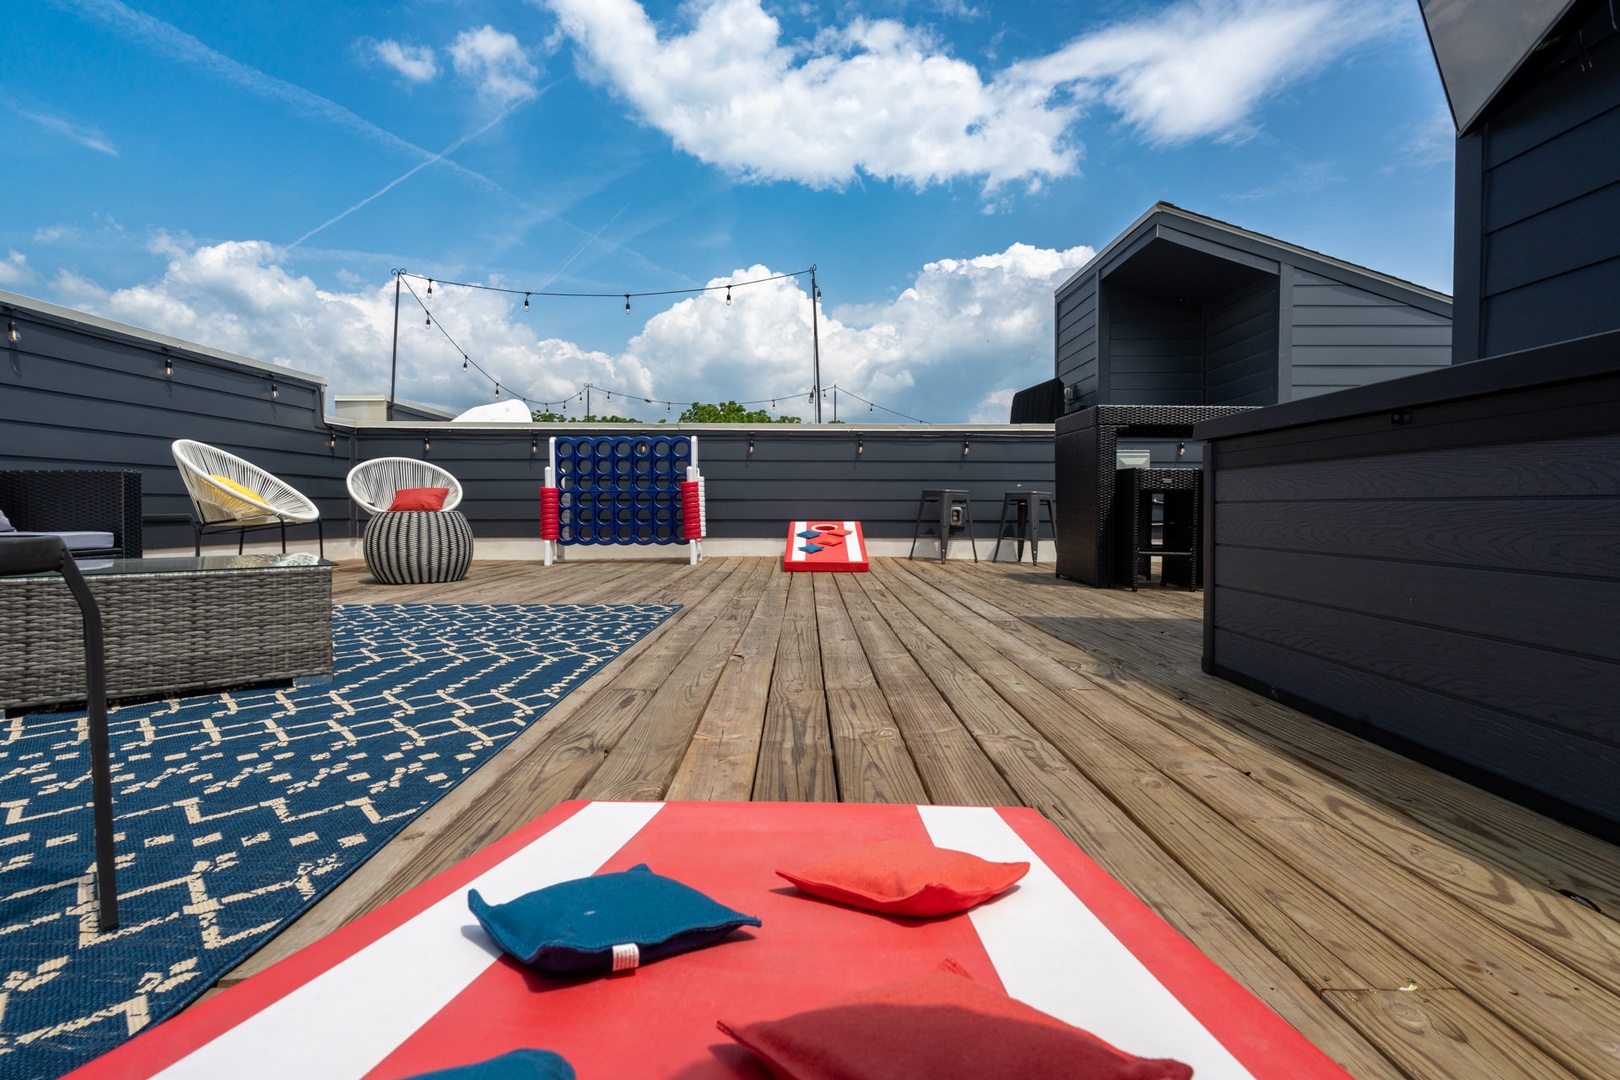 Rooftop deck with gas BBQ grill, cornhole, and ample seating